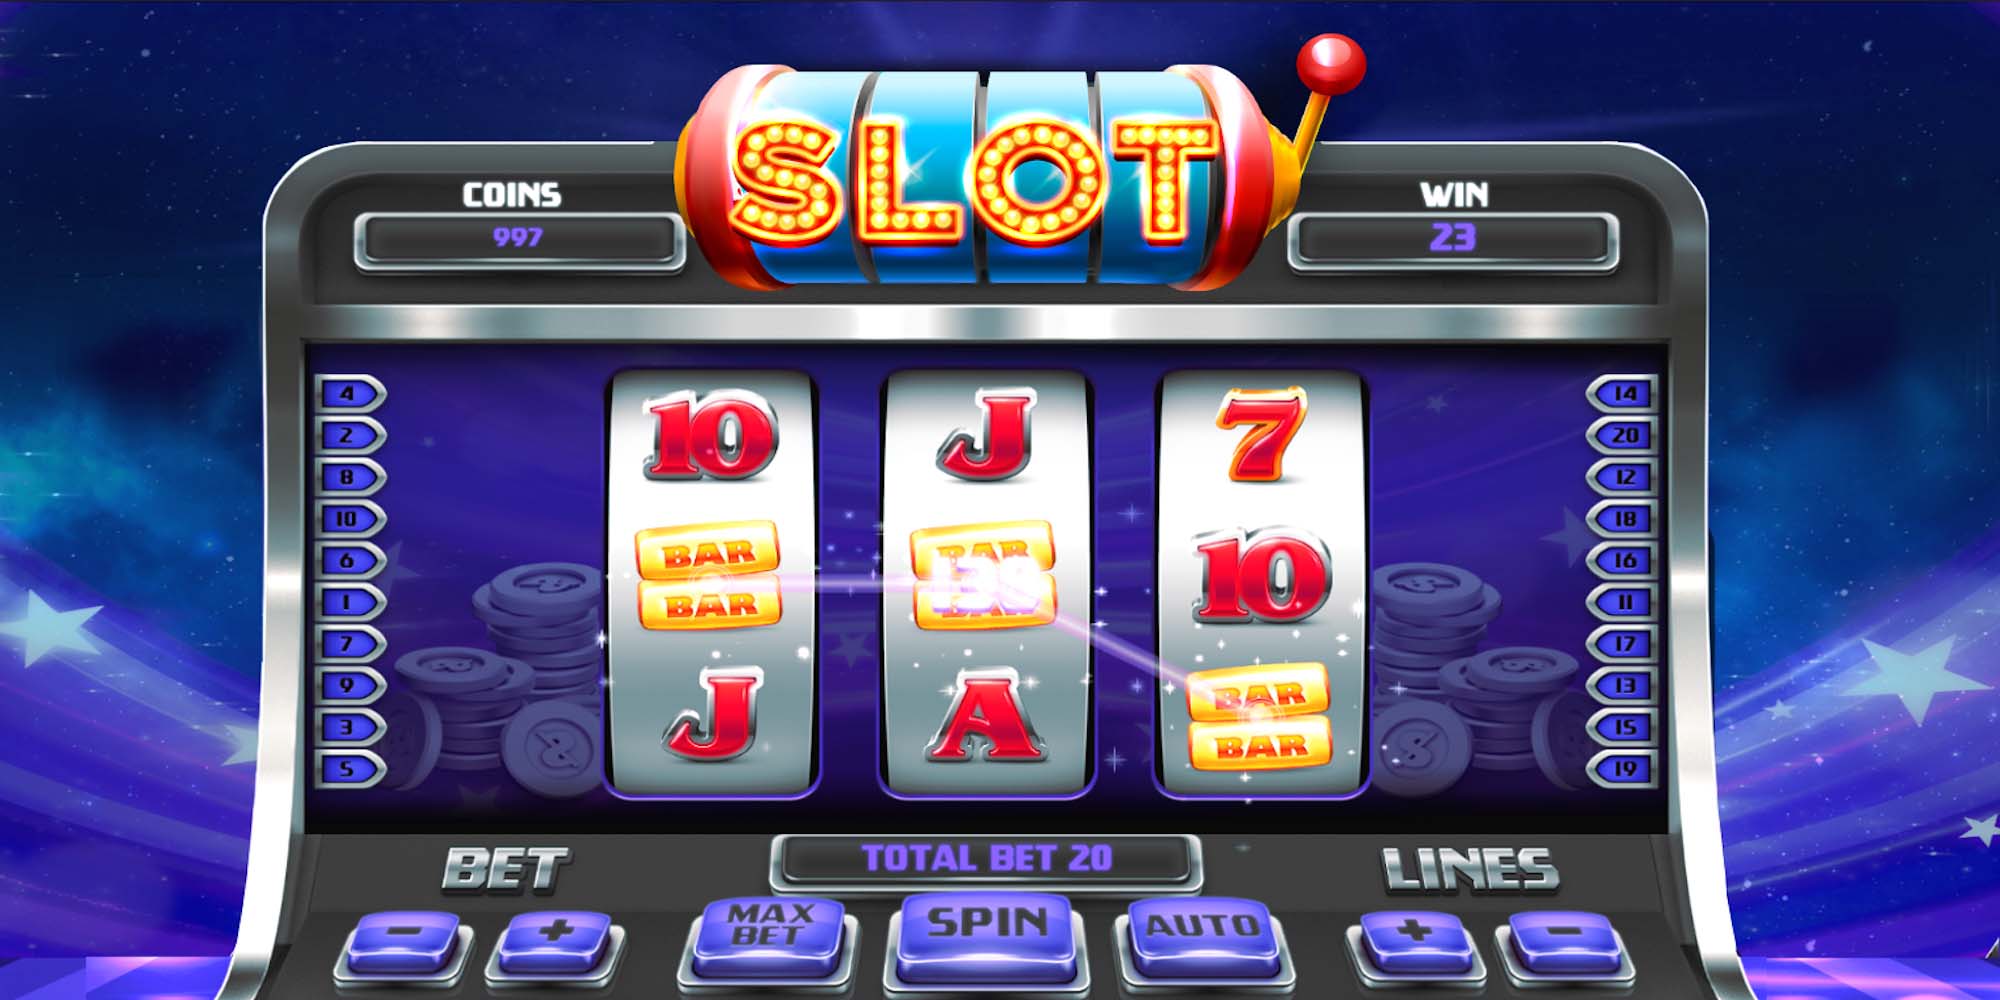 Free Spins Mobile Slots